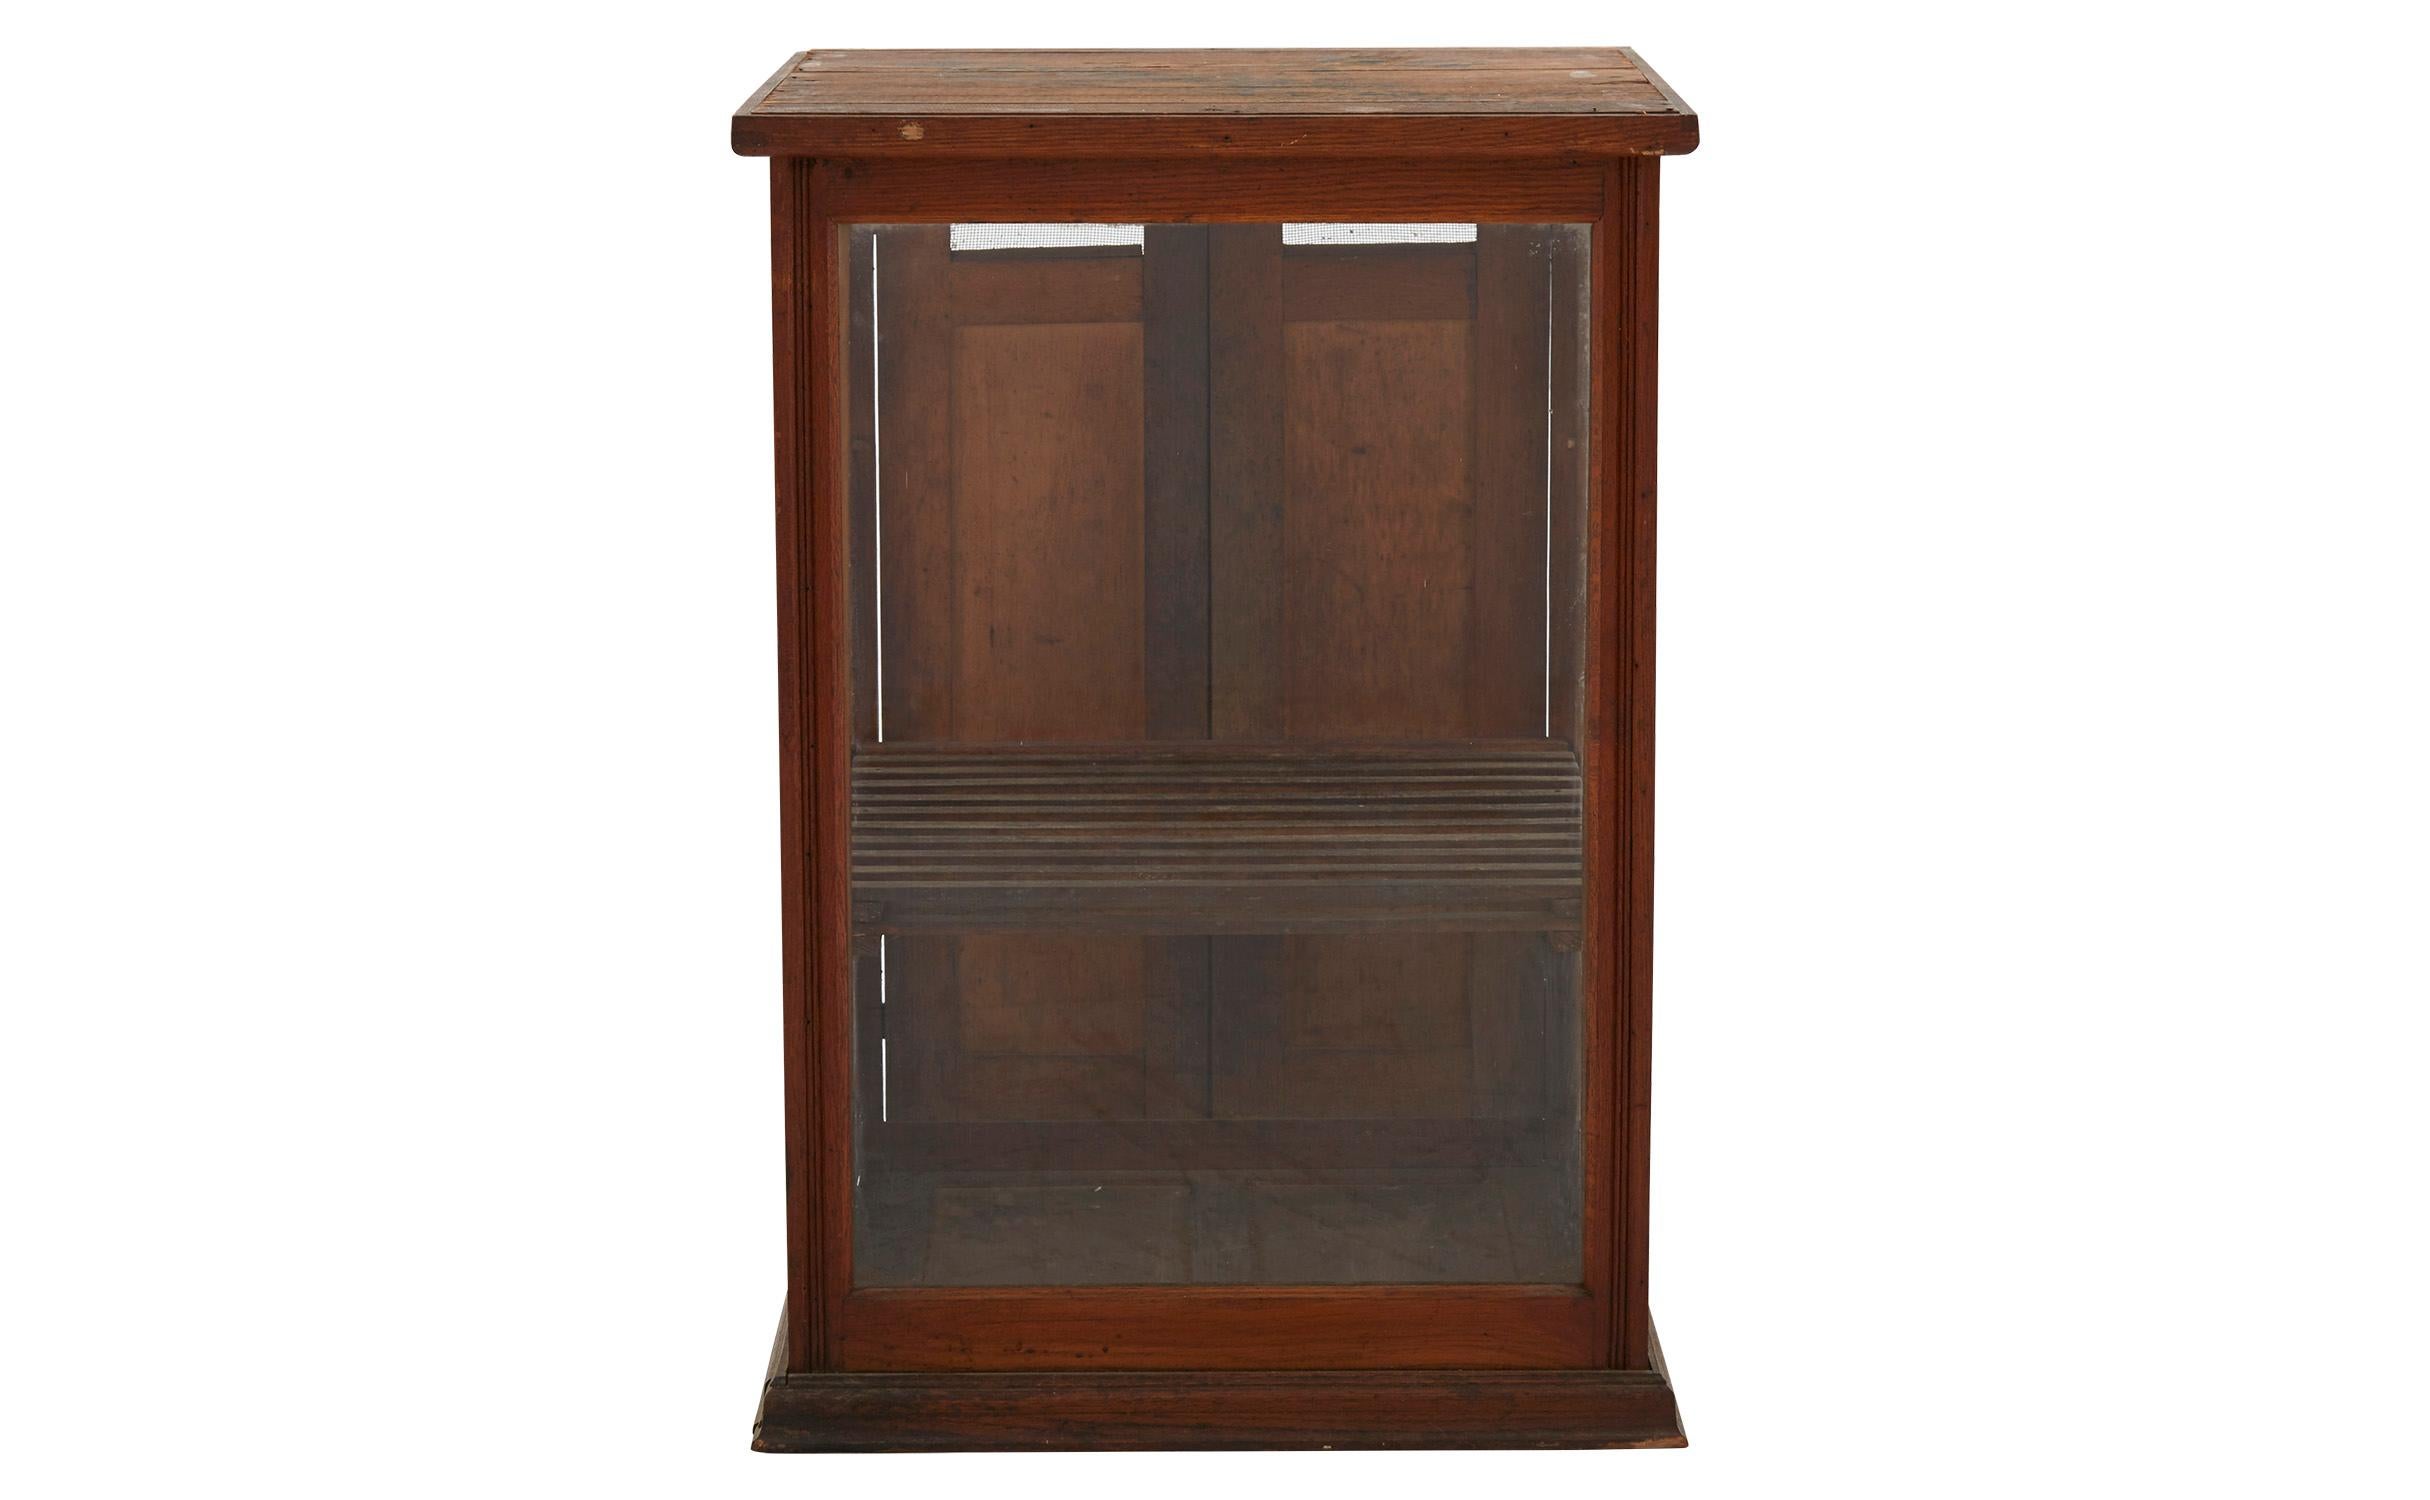 Our vintage shop display case was crafted in America in the early 20th century. Once used to exhibit small wares, this countertop case features a slatted wooden shelf, surrounded by three original glass sides and two wood hatch doors at its rear. It